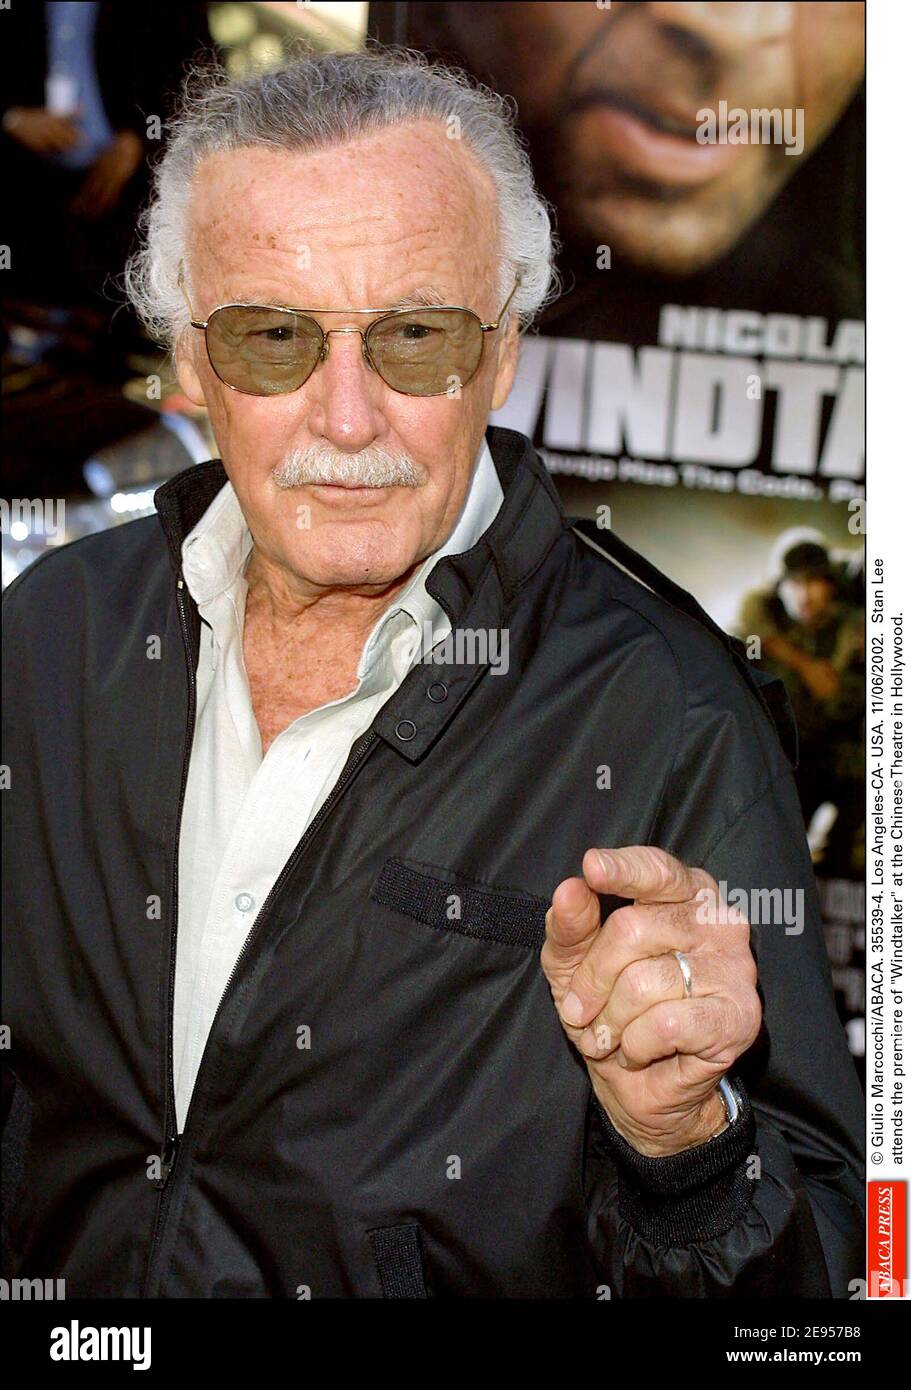 © Giulio Marcocchi/ABACA. 35539-4. Los Angeles-CA- USA. 11/06/2002. Stan Lee attends the premiere of Windtalker at the Chinese Theatre in Hollywood. Stock Photo